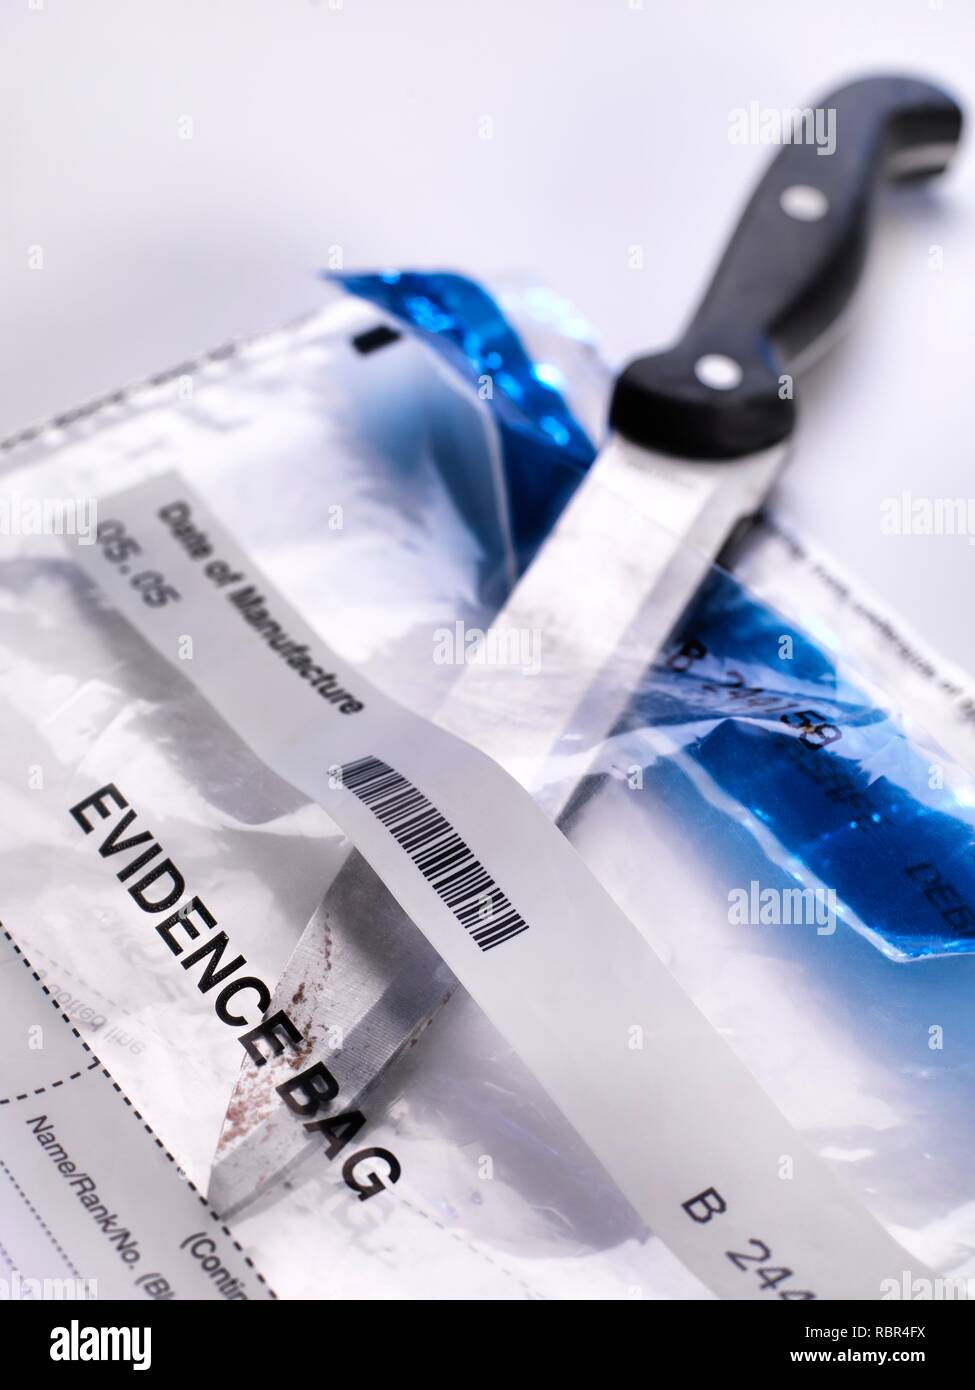 Forensic evidence collection. A knife about to be swabbed for DNA (deoxyribonucleic acid) and other forensic tests. Stock Photo